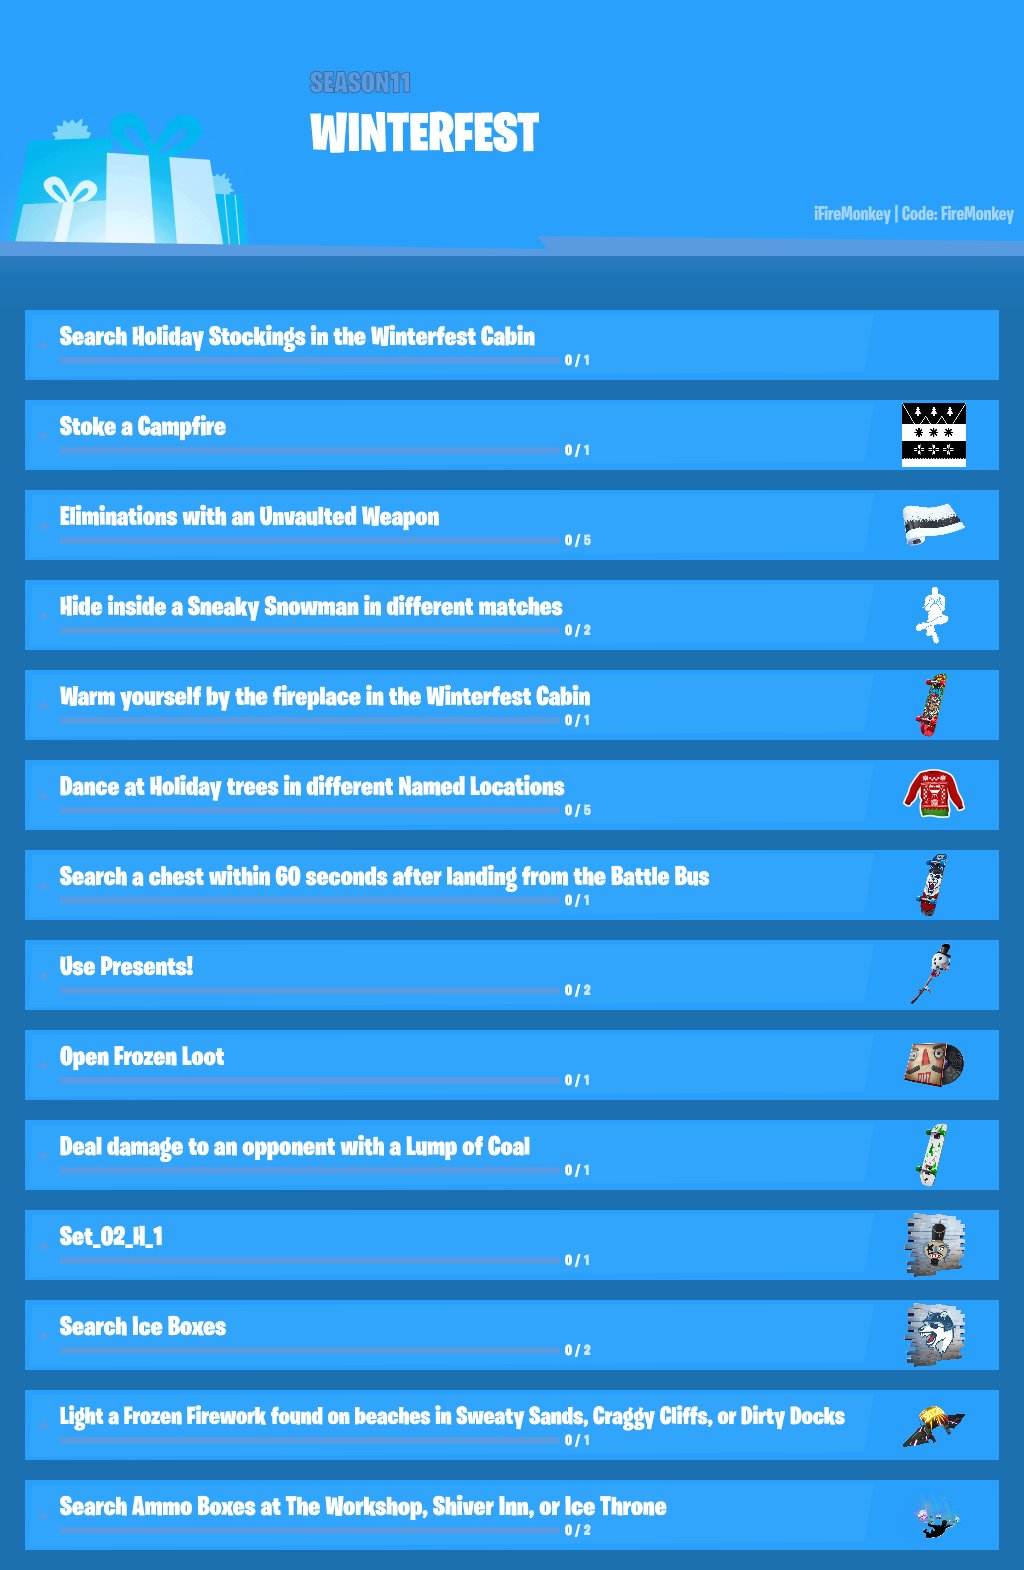 Storm Fortnite Leaks On Twitter Seems Like We Are Getting So Sort Of 12 Days Of Fortnite But With A Different Name Not Sure But Here Are The Challenge List Via